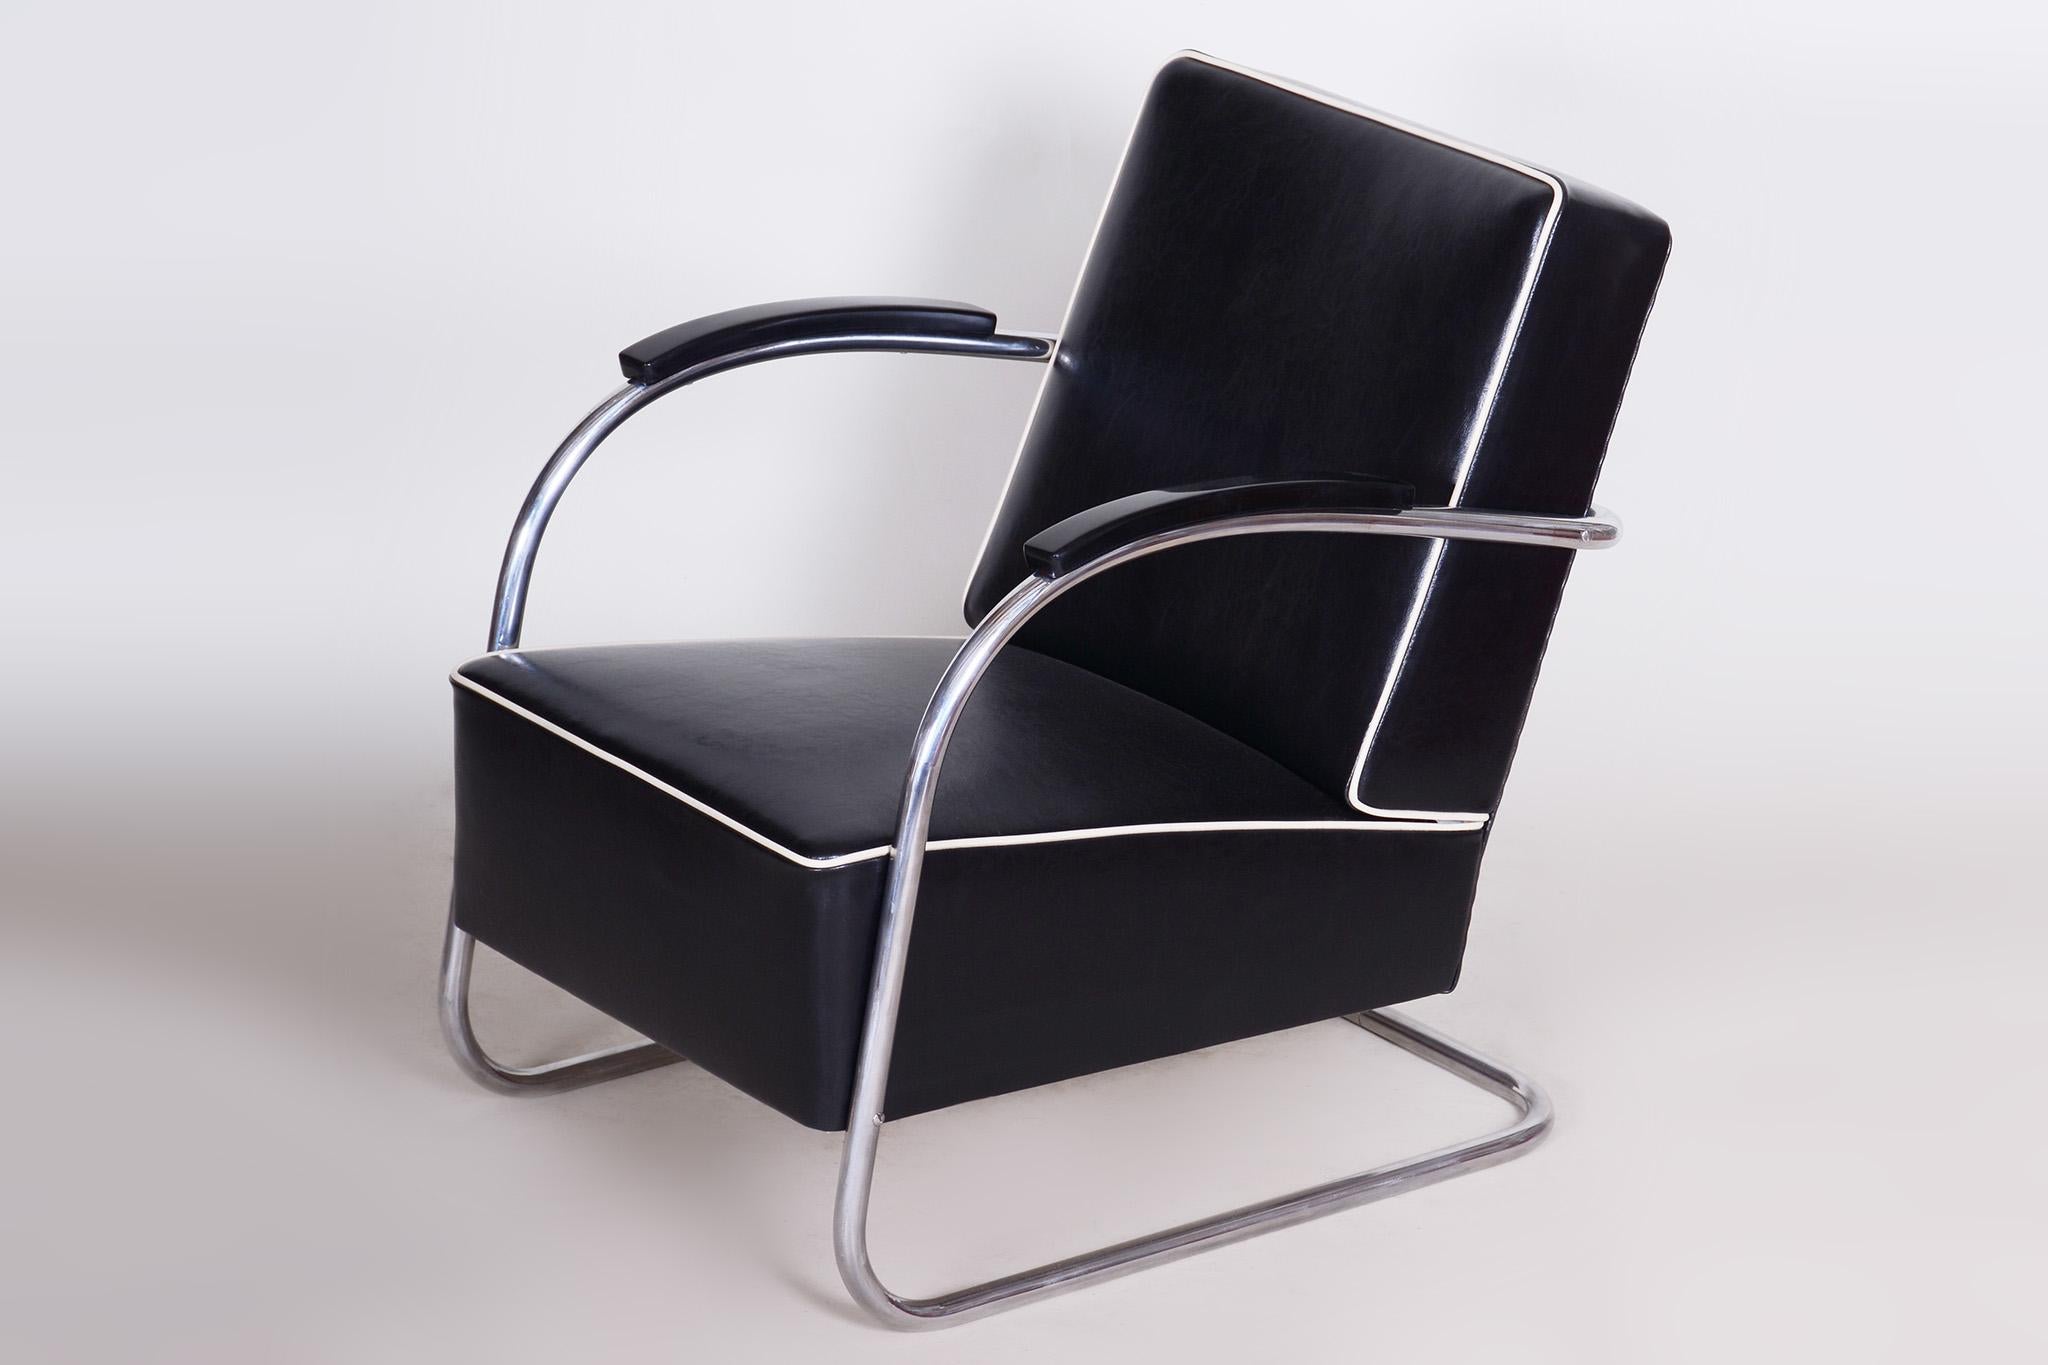 Bauhaus Black Leather Armchair, 1930s Czechia, Made by Mucke-Melder and Fully Restored For Sale